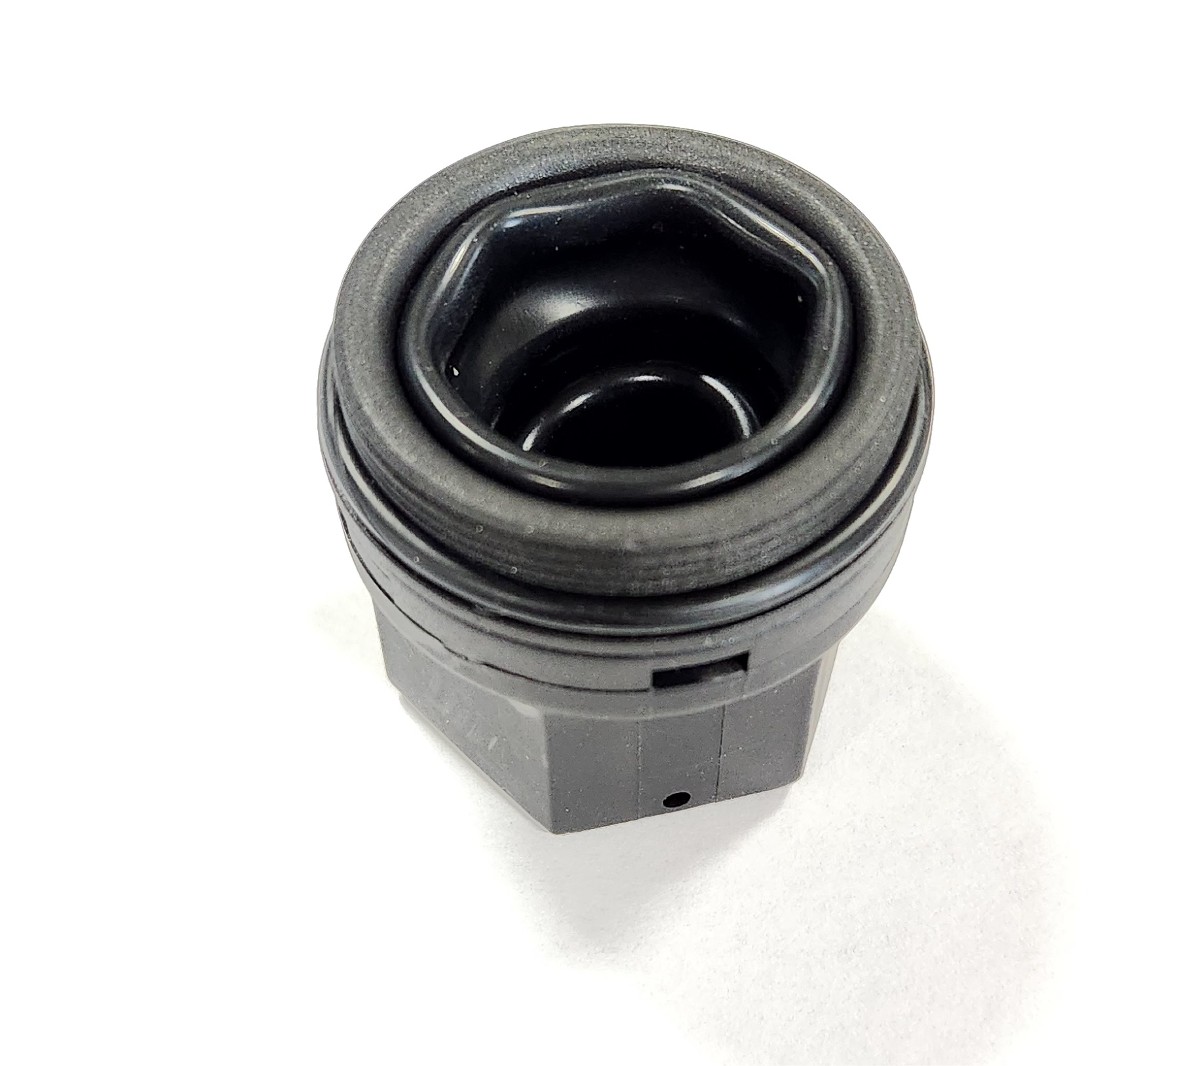 Replacement Master Cylinder Cap for Titan Models 10 and 20 Actuators